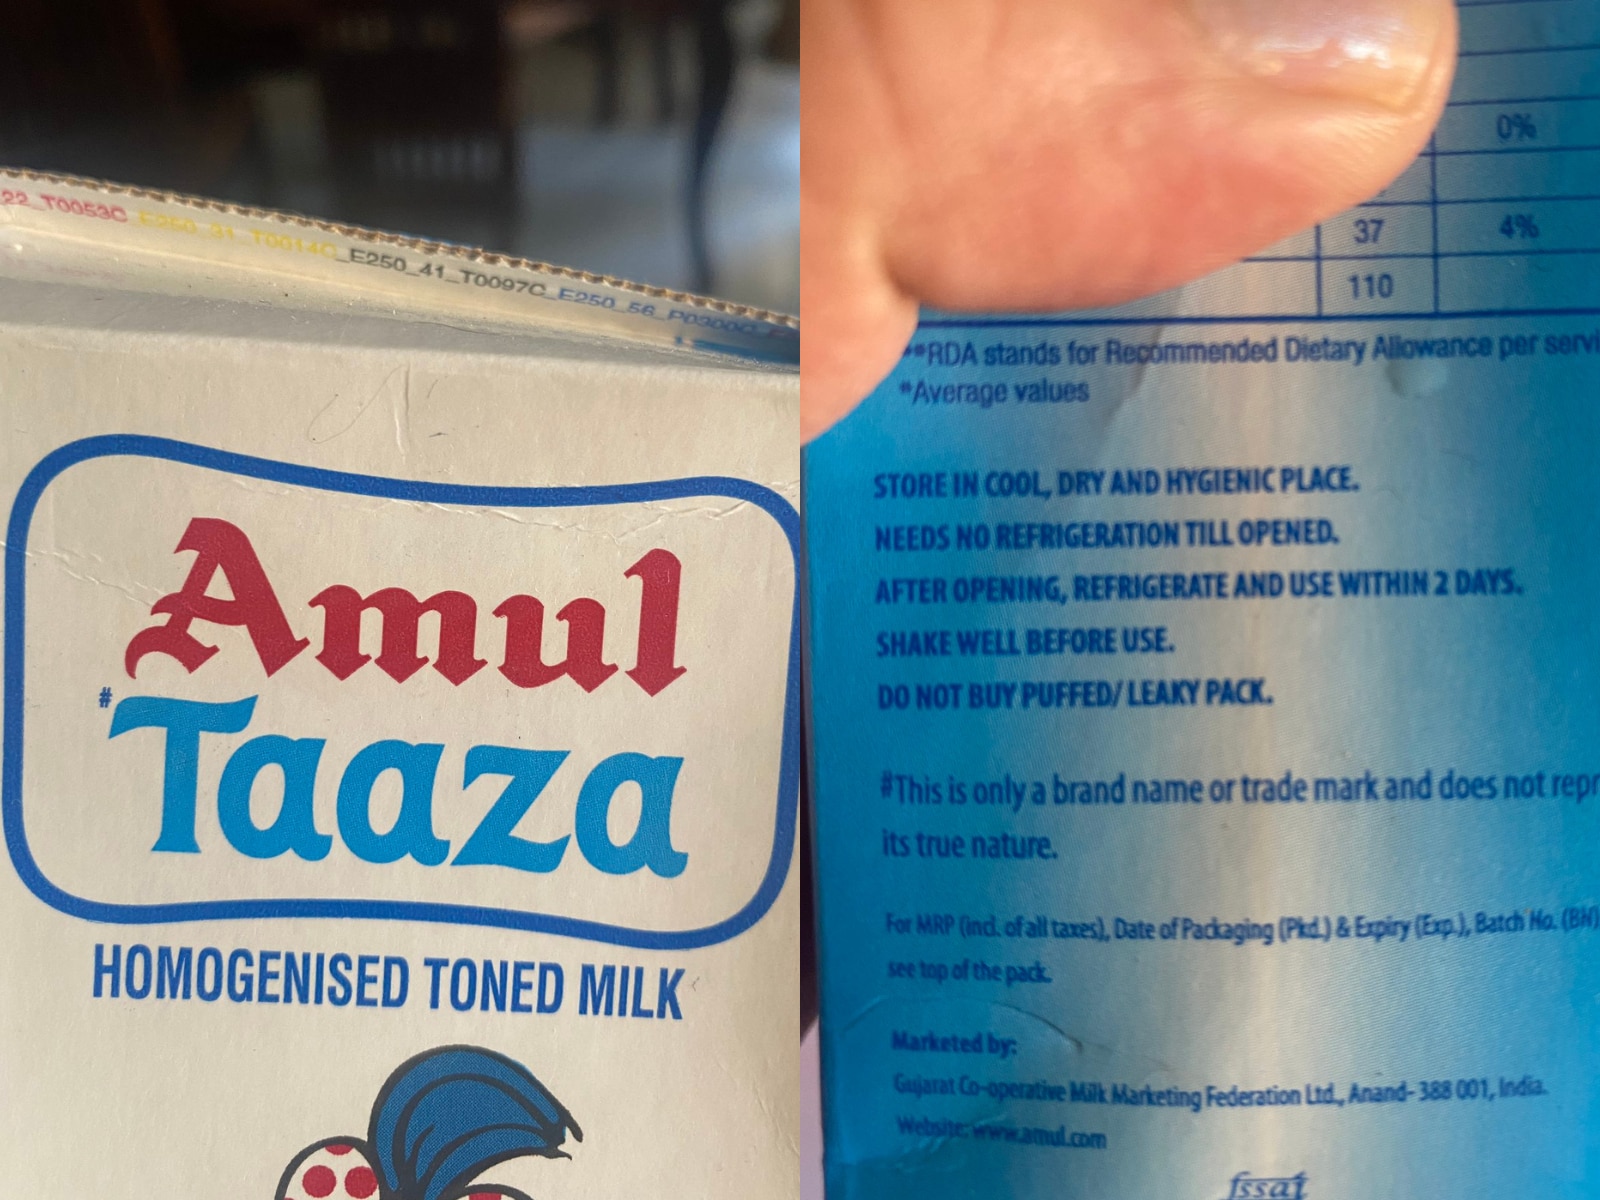 Amul fresh milk prices to go up by Rs 2/litre from March 1 | Companies  News, Times Now